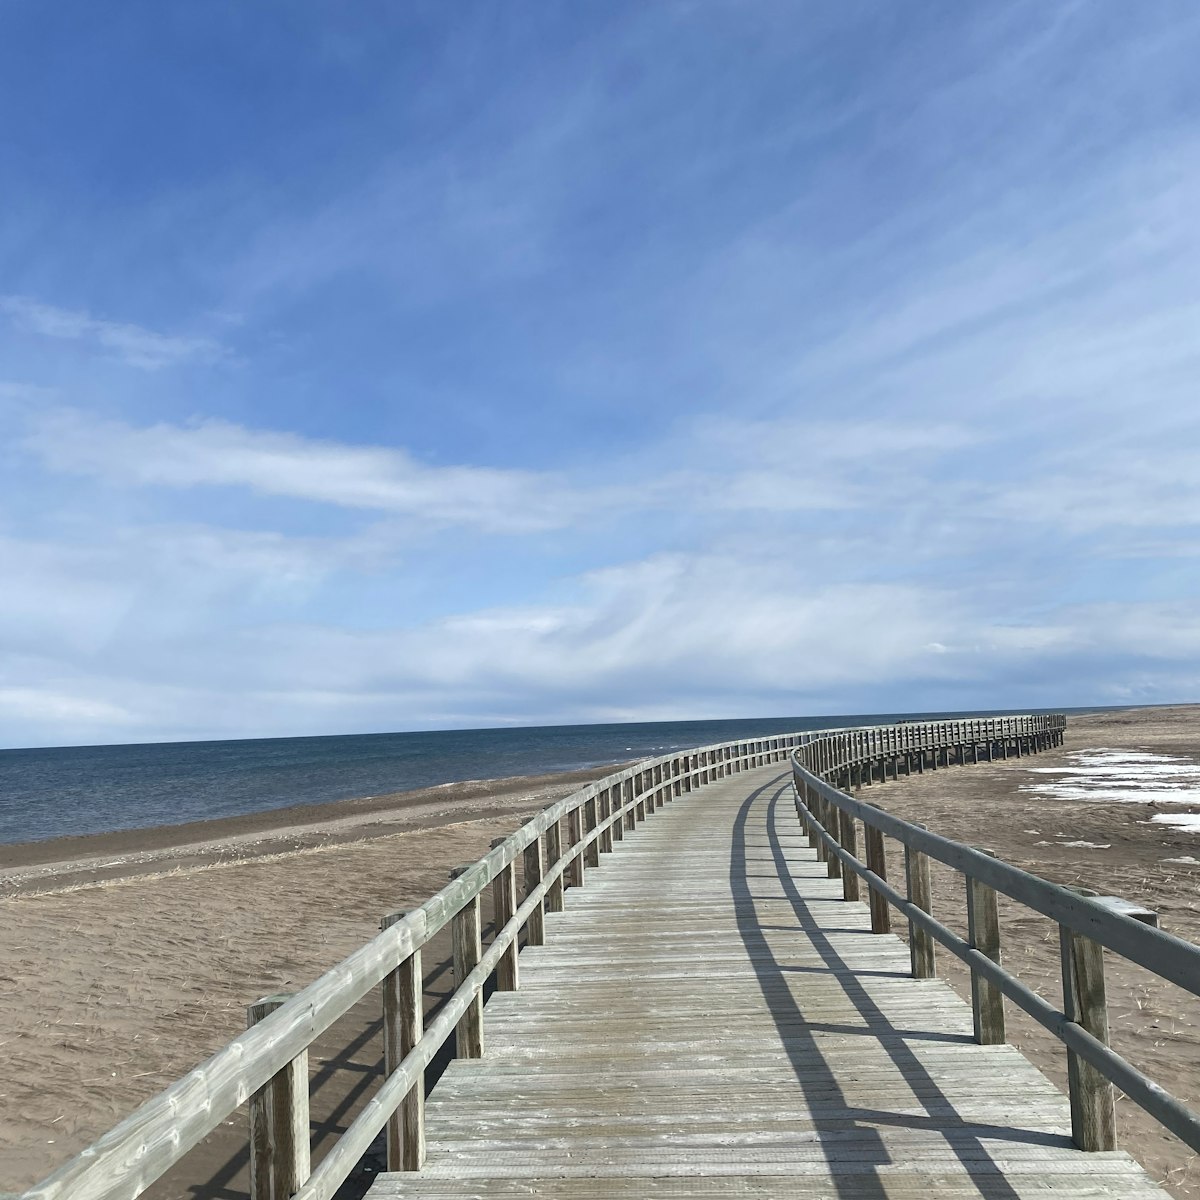 Bouctouche briadwalk, Irving Eco-Centre, NB, Canada; Shutterstock ID 2295488063; purchase_order: 65050; job: ; client: ; other:
2295488063